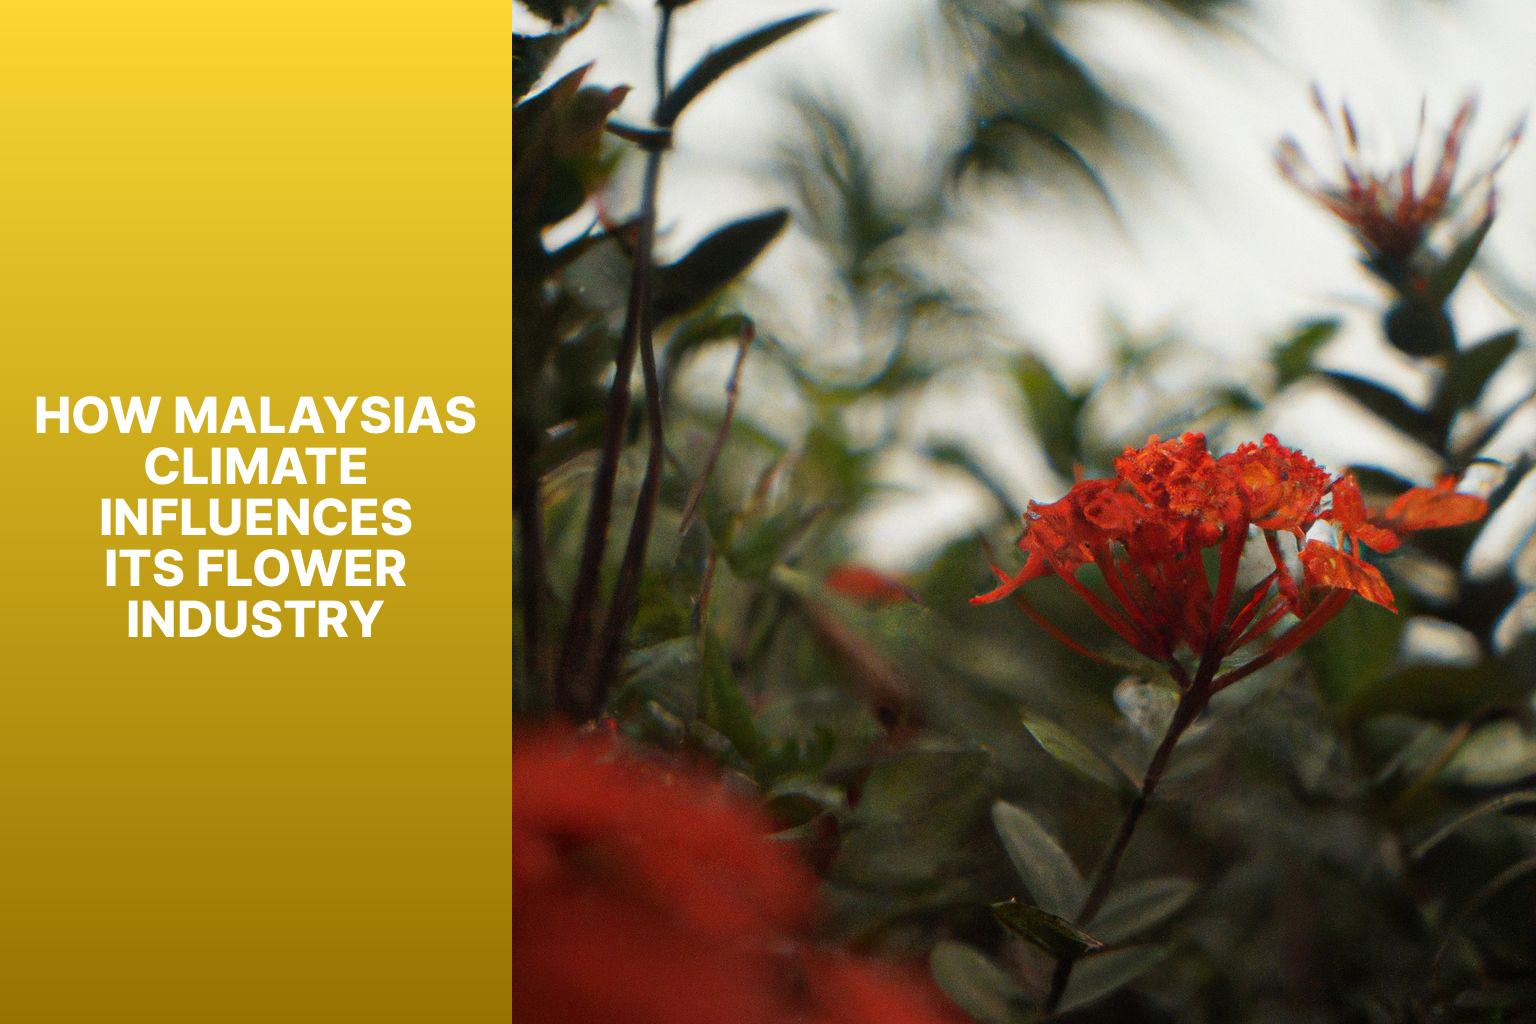 How Malaysias Climate Influences Its Flower Industry